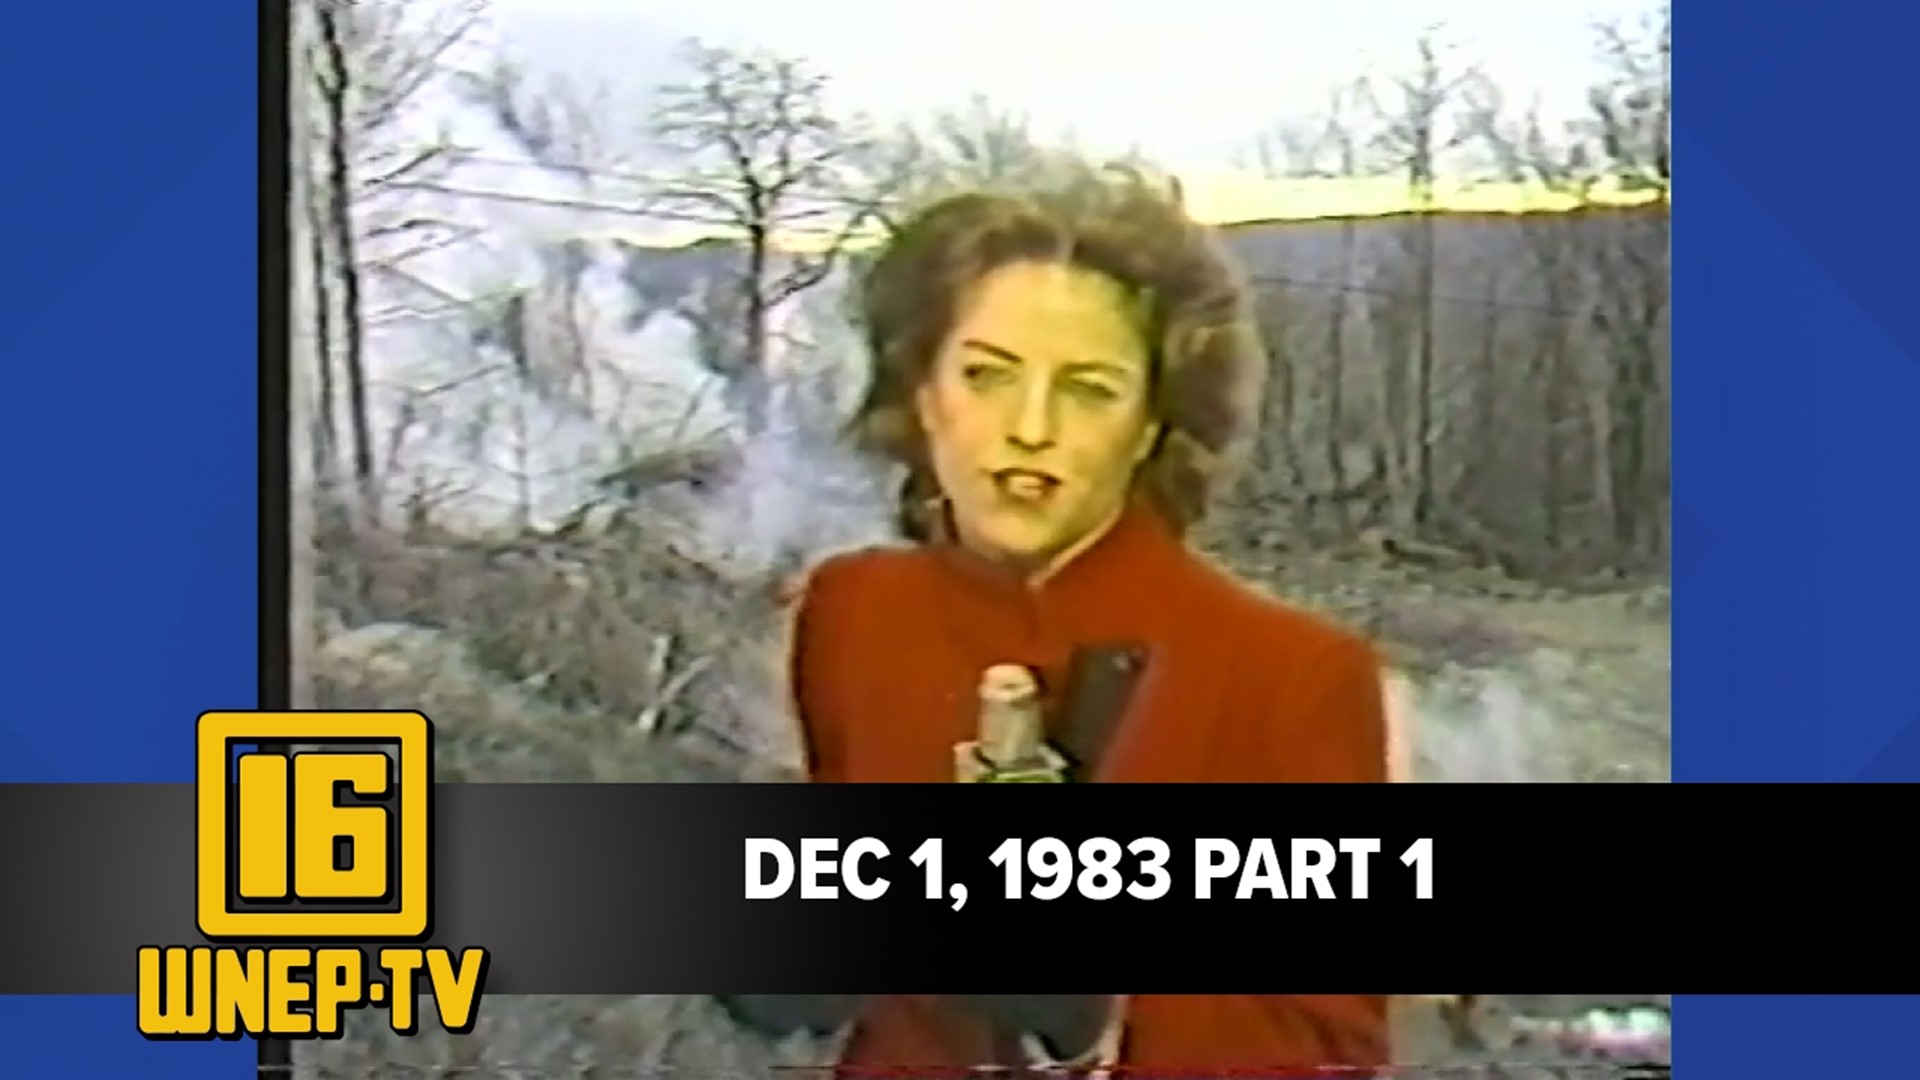 Join Frank Andrews for curated stories from December 1, 1983.